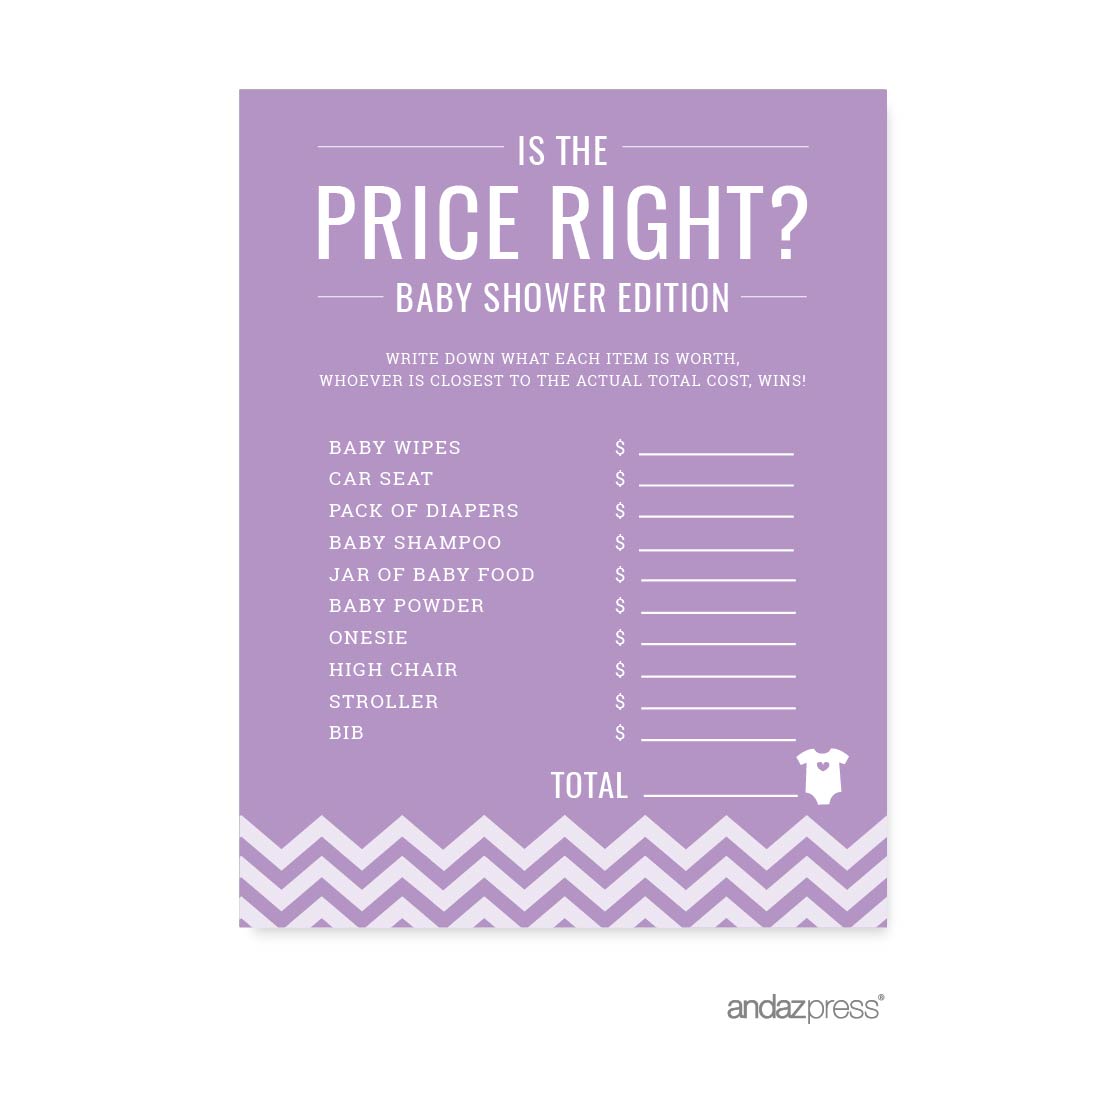 Is The Price Right? Lavender Chevron Baby Shower Games, 20-Pack - image 1 of 2